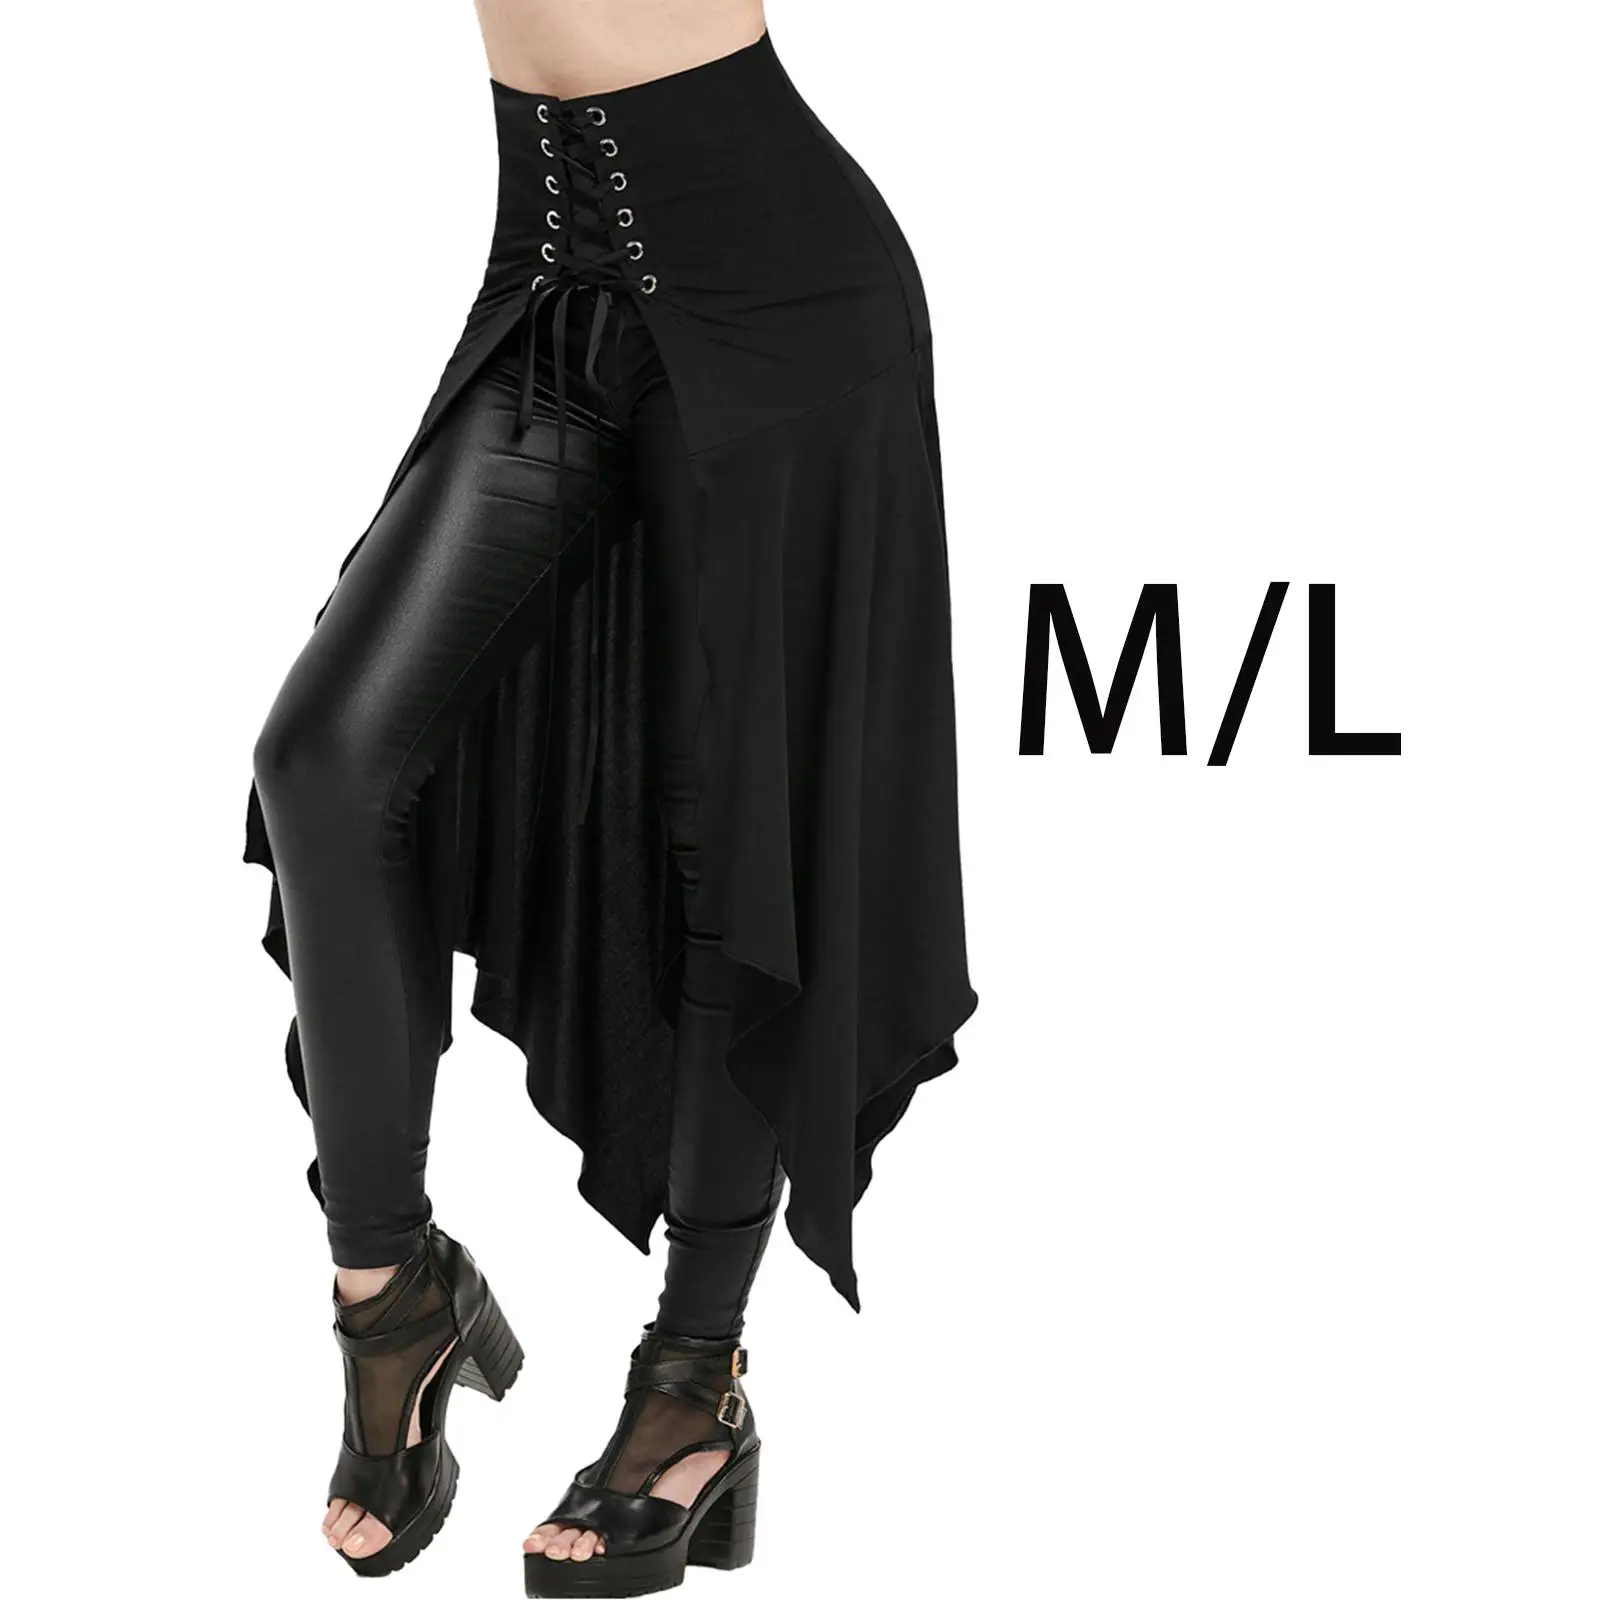 Womens Midi Skirt High Waisted Tulle Skirts Adjustable Lace up Flowy Long Skirt for Stage Performance Festival Dress up